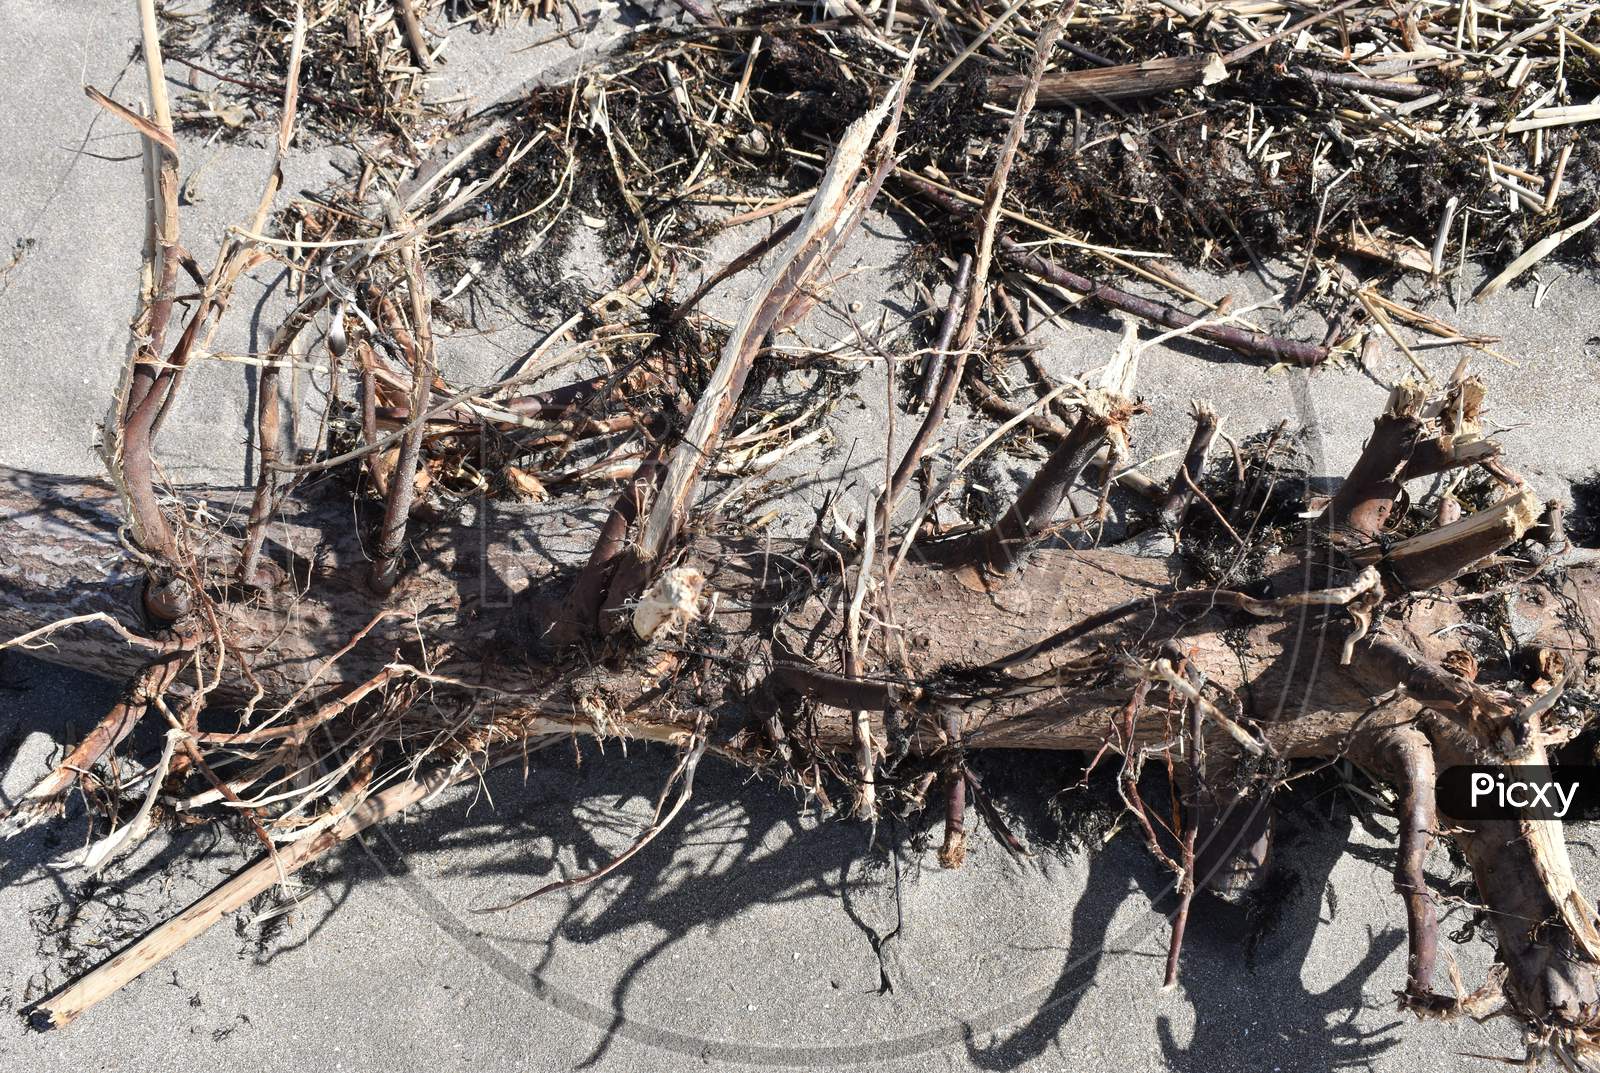 The dried woods landed on the beach by travelling through water